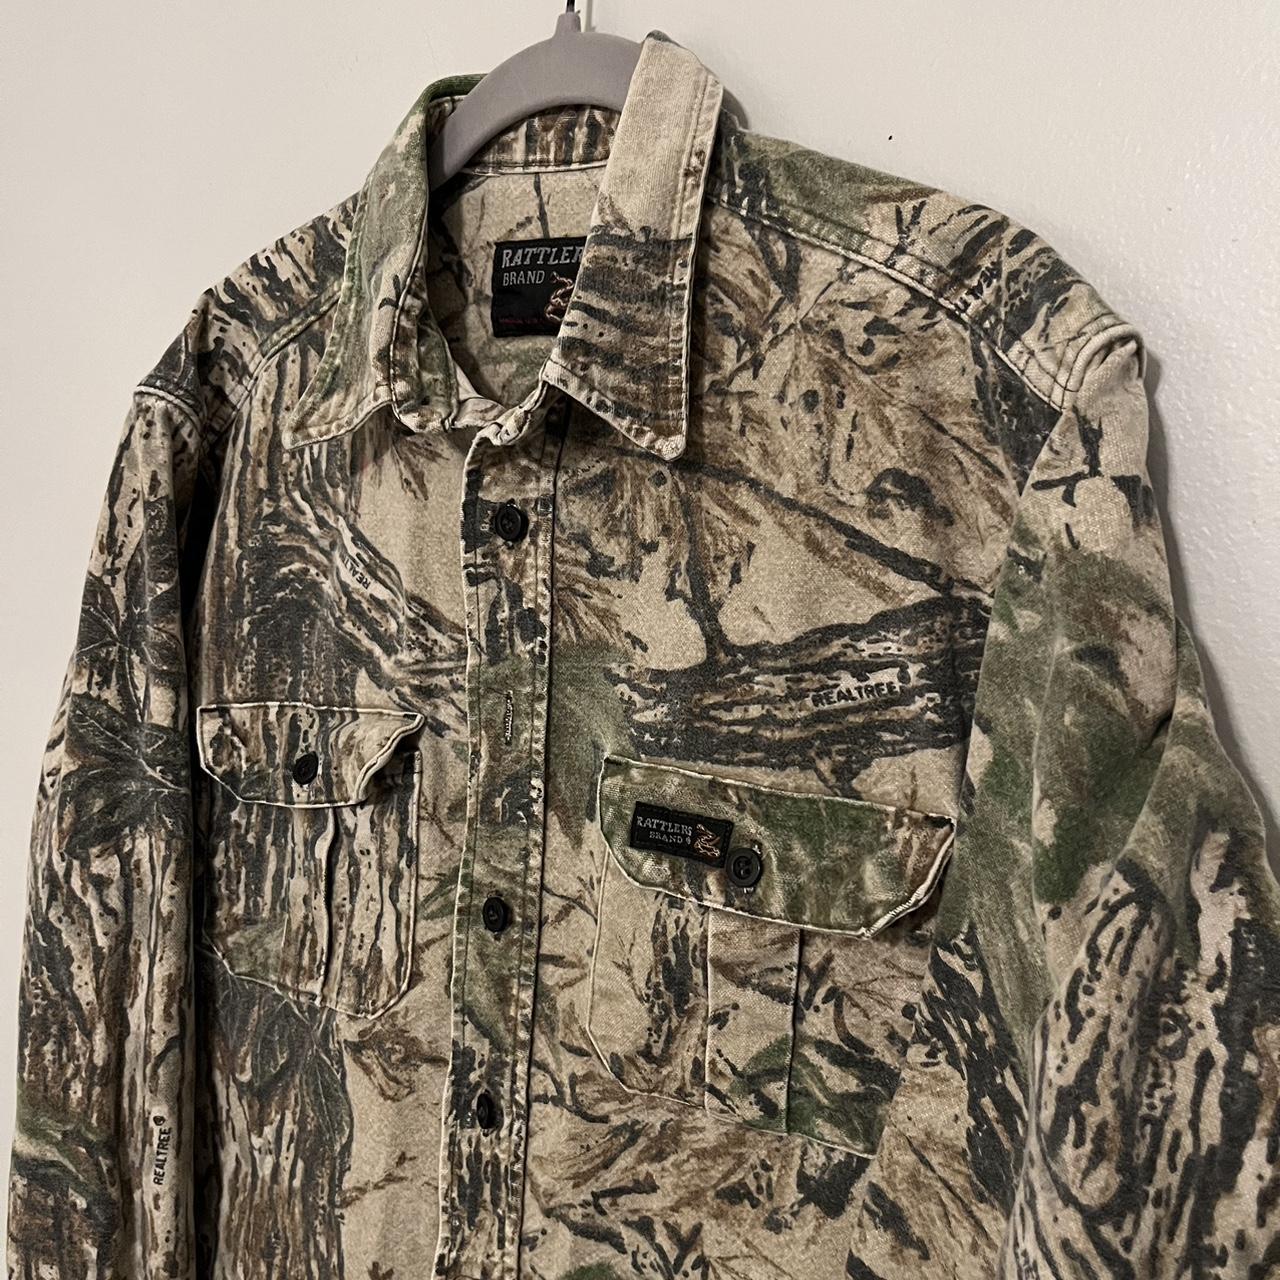 Vintage Rattlers Realtree Camo Shirt Flannel M Made - Depop